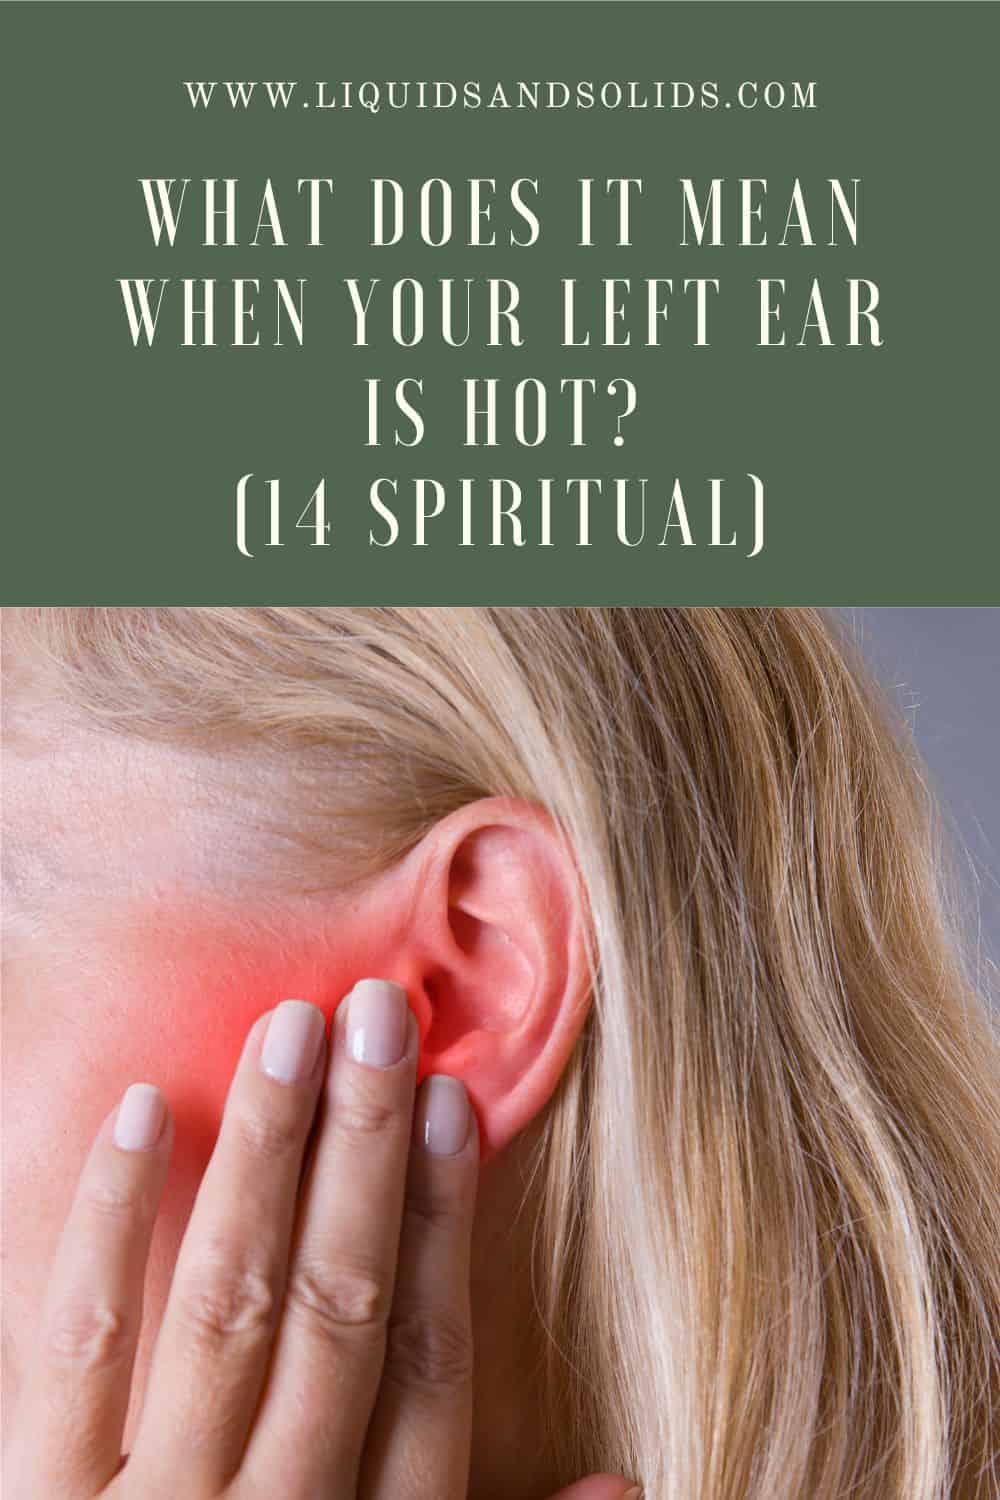 What Does it Mean When Your Left Ear is Hot?